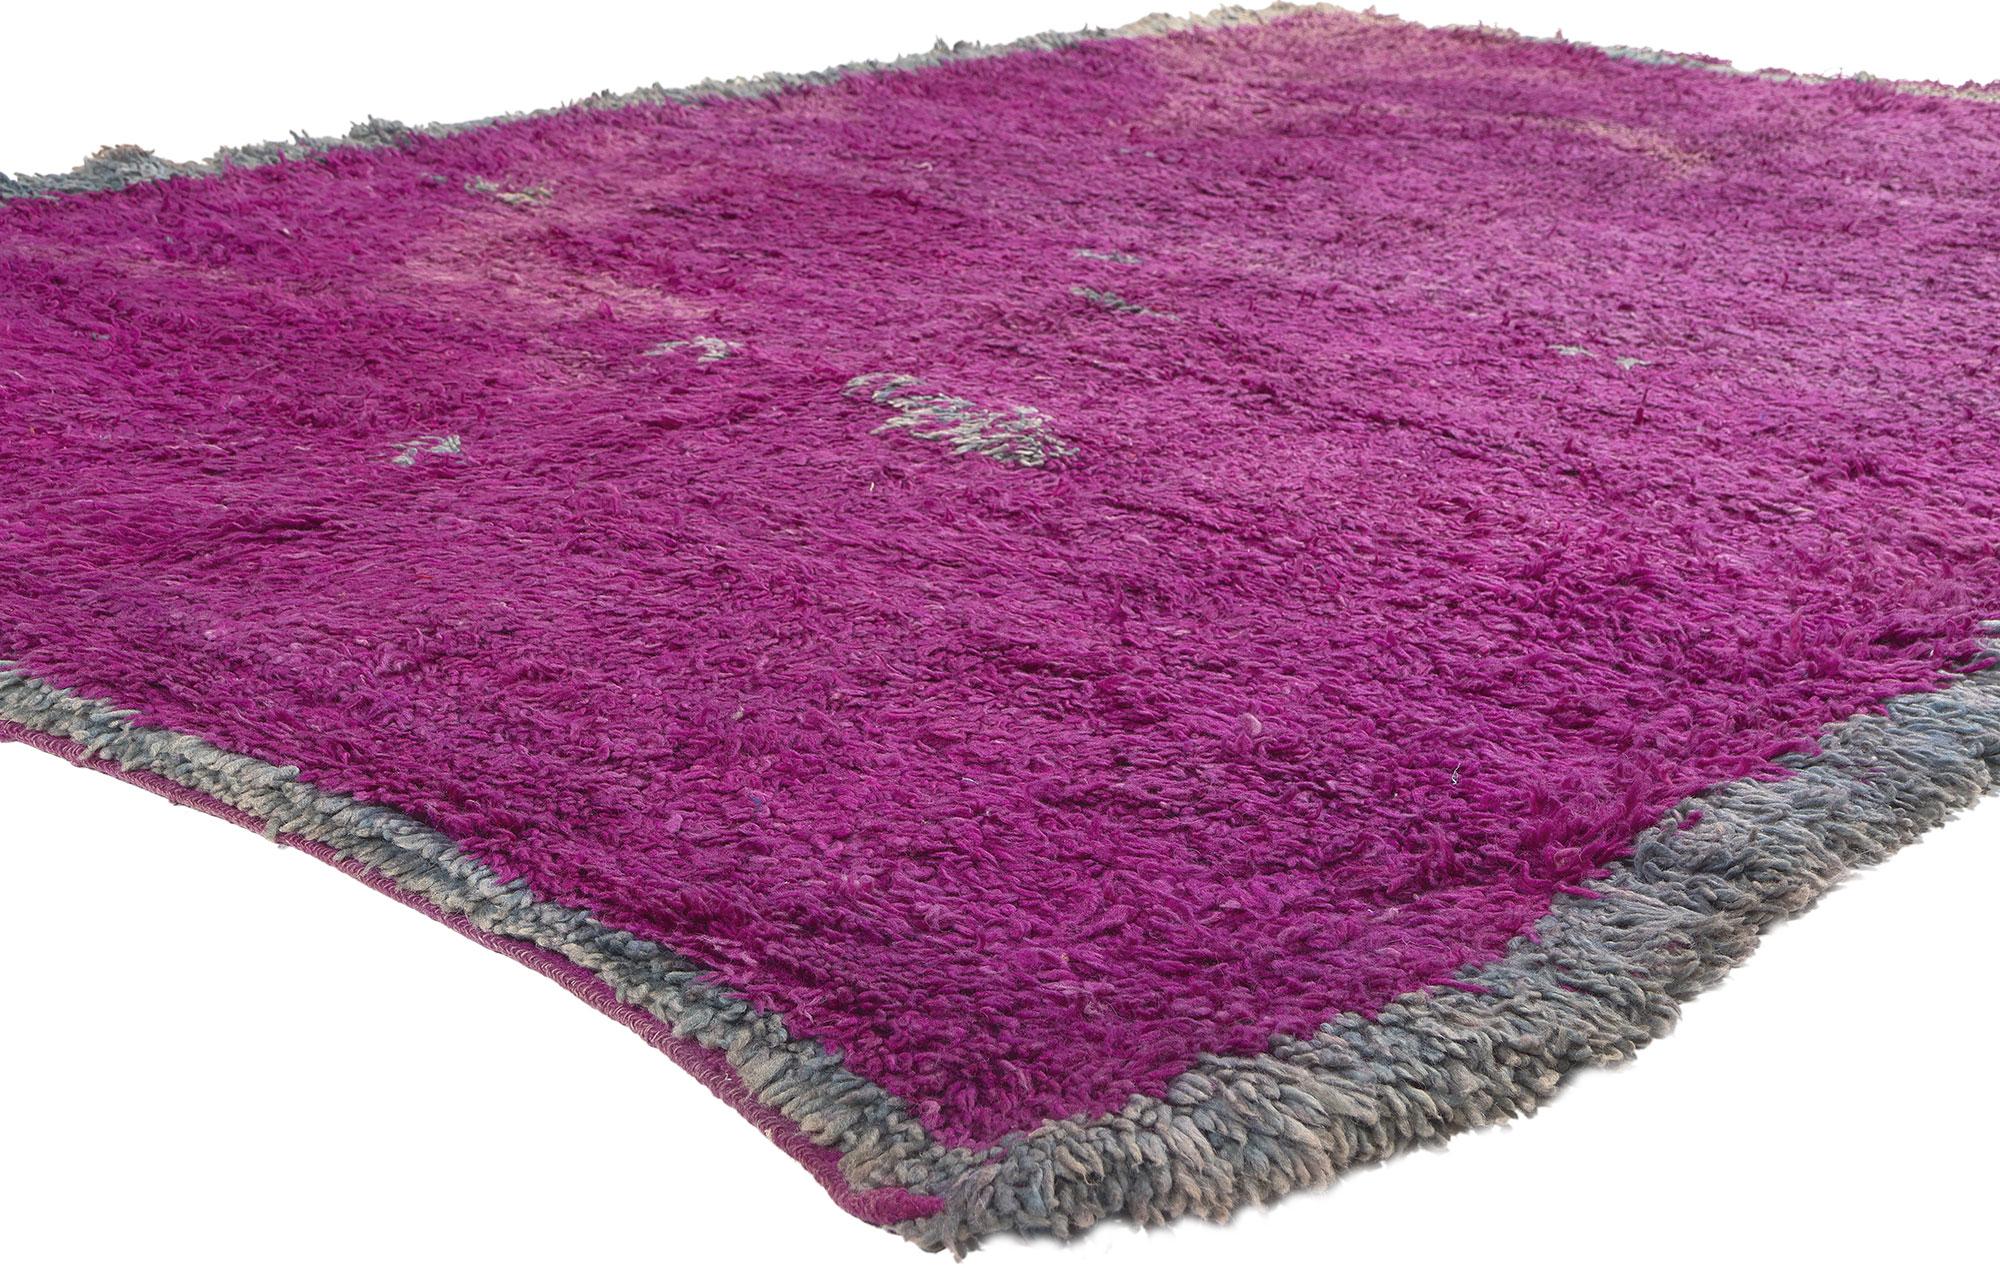 20669 Vintage Purple Beni Mrirt Moroccan Rug, 06'08 x 09'05.

Step into the alluring history of this hand-knotted wool vintage Beni Mrirt Moroccan rug, a captivating embodiment of woven beauty intertwined with the rich culture of Berber